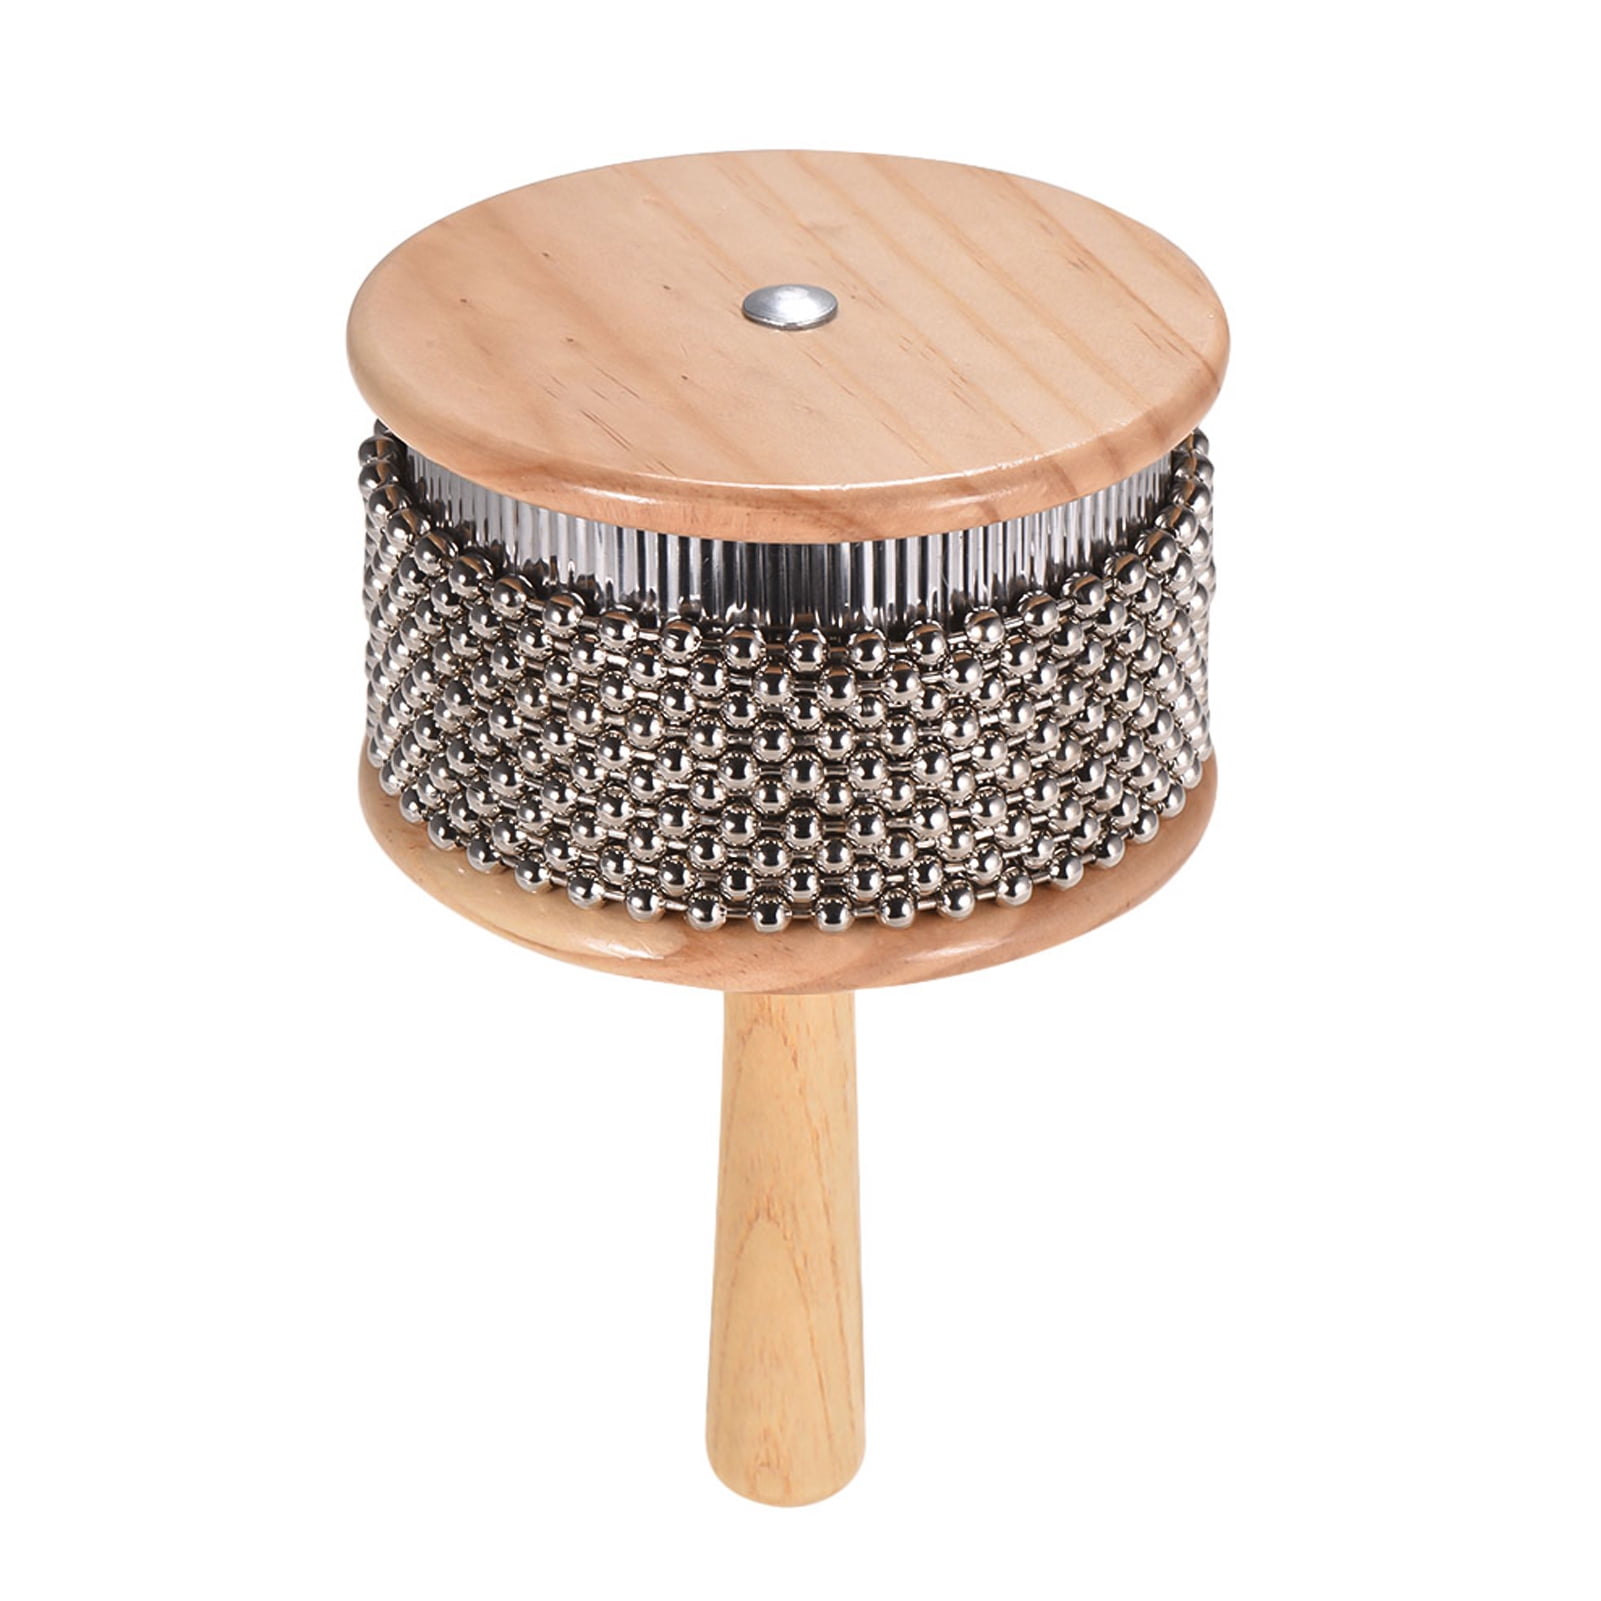 Wooden Hand Percussion Package Includes Double Bell Wooden Agogo w/Mallet & Stir Drum Hand Percussion Cabasa Medium Wooden Hand Percussion Shaker W/Metal Beads 